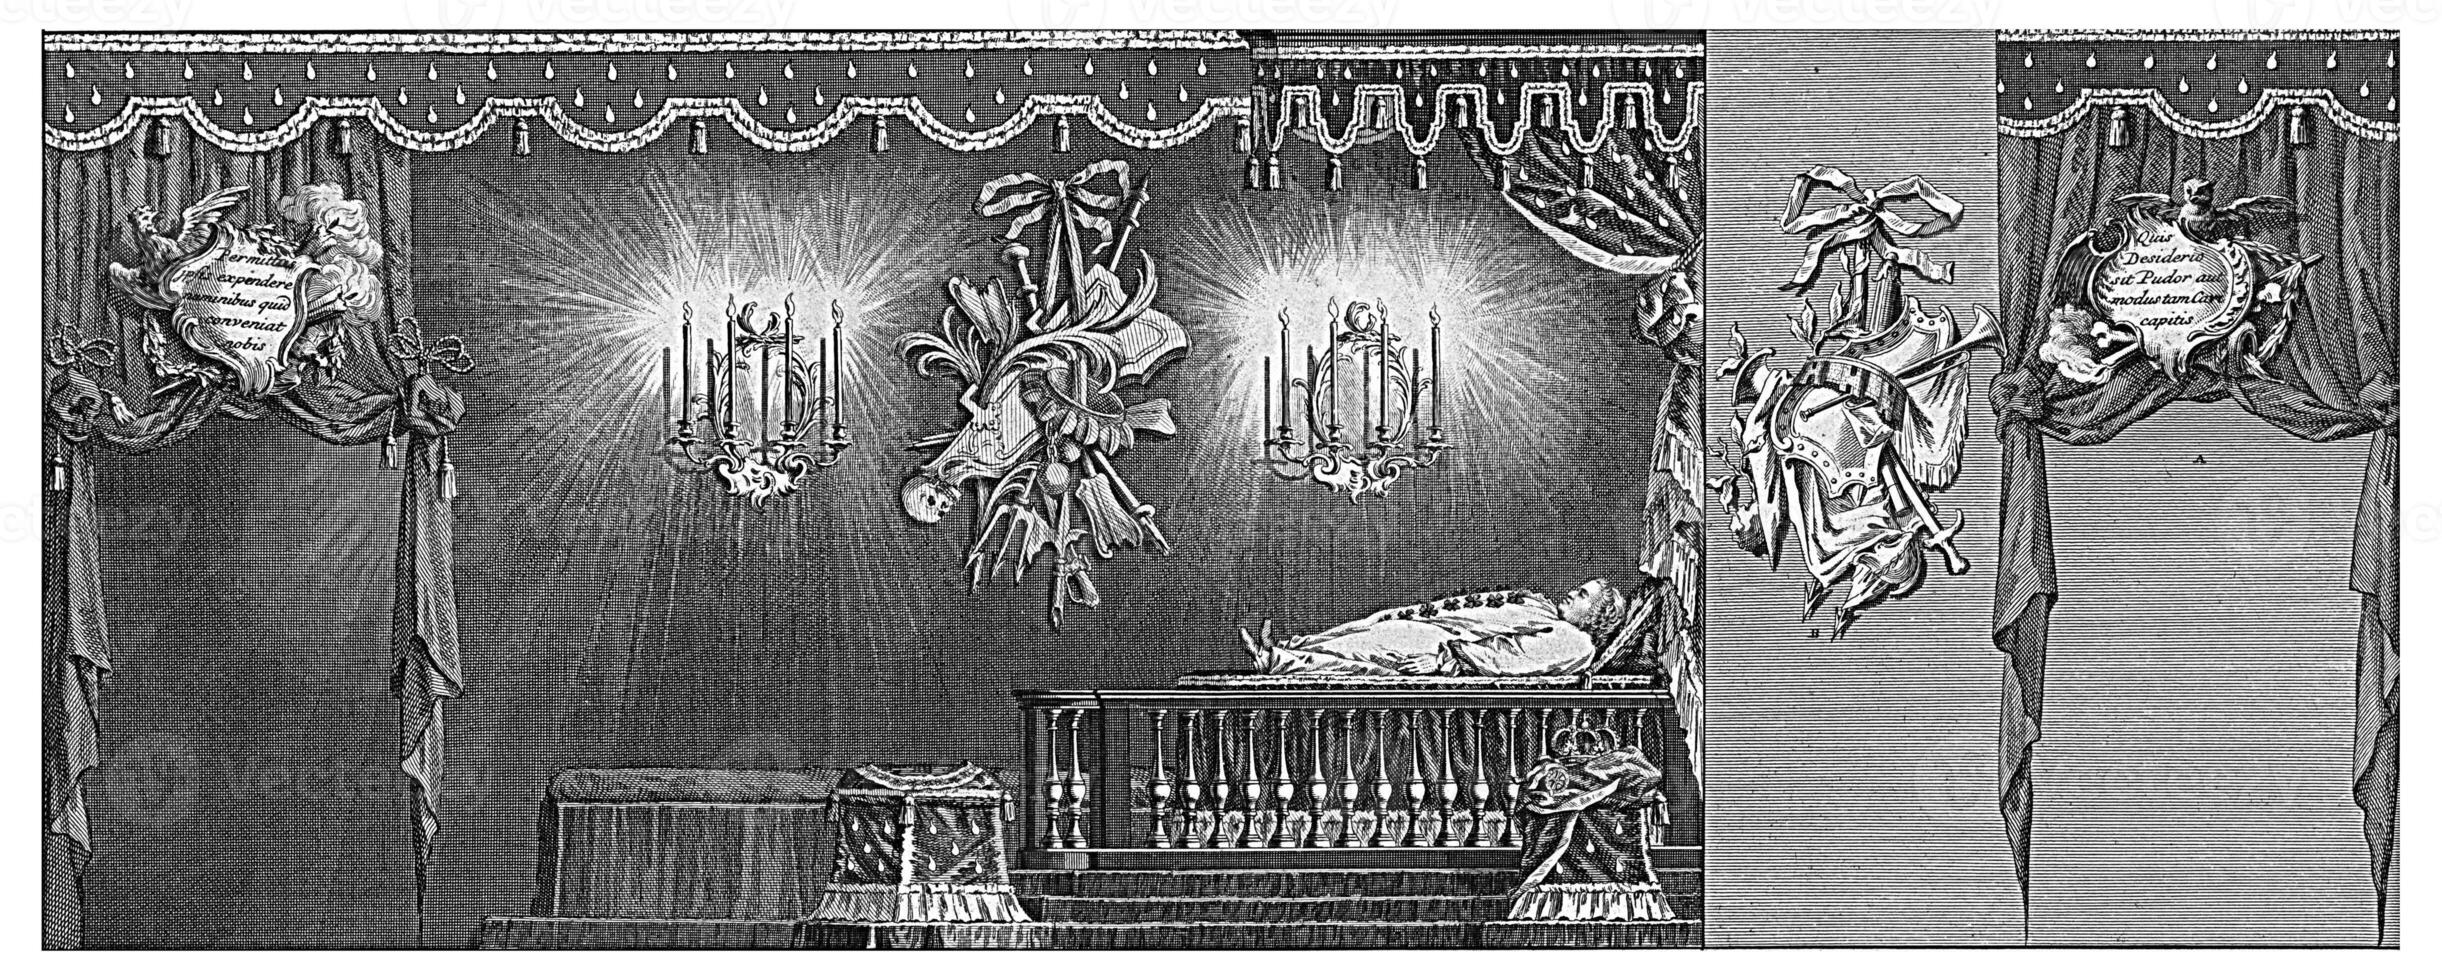 Right side of the hall with the pageantry with the body of Prince William IV, vintage illustration. photo